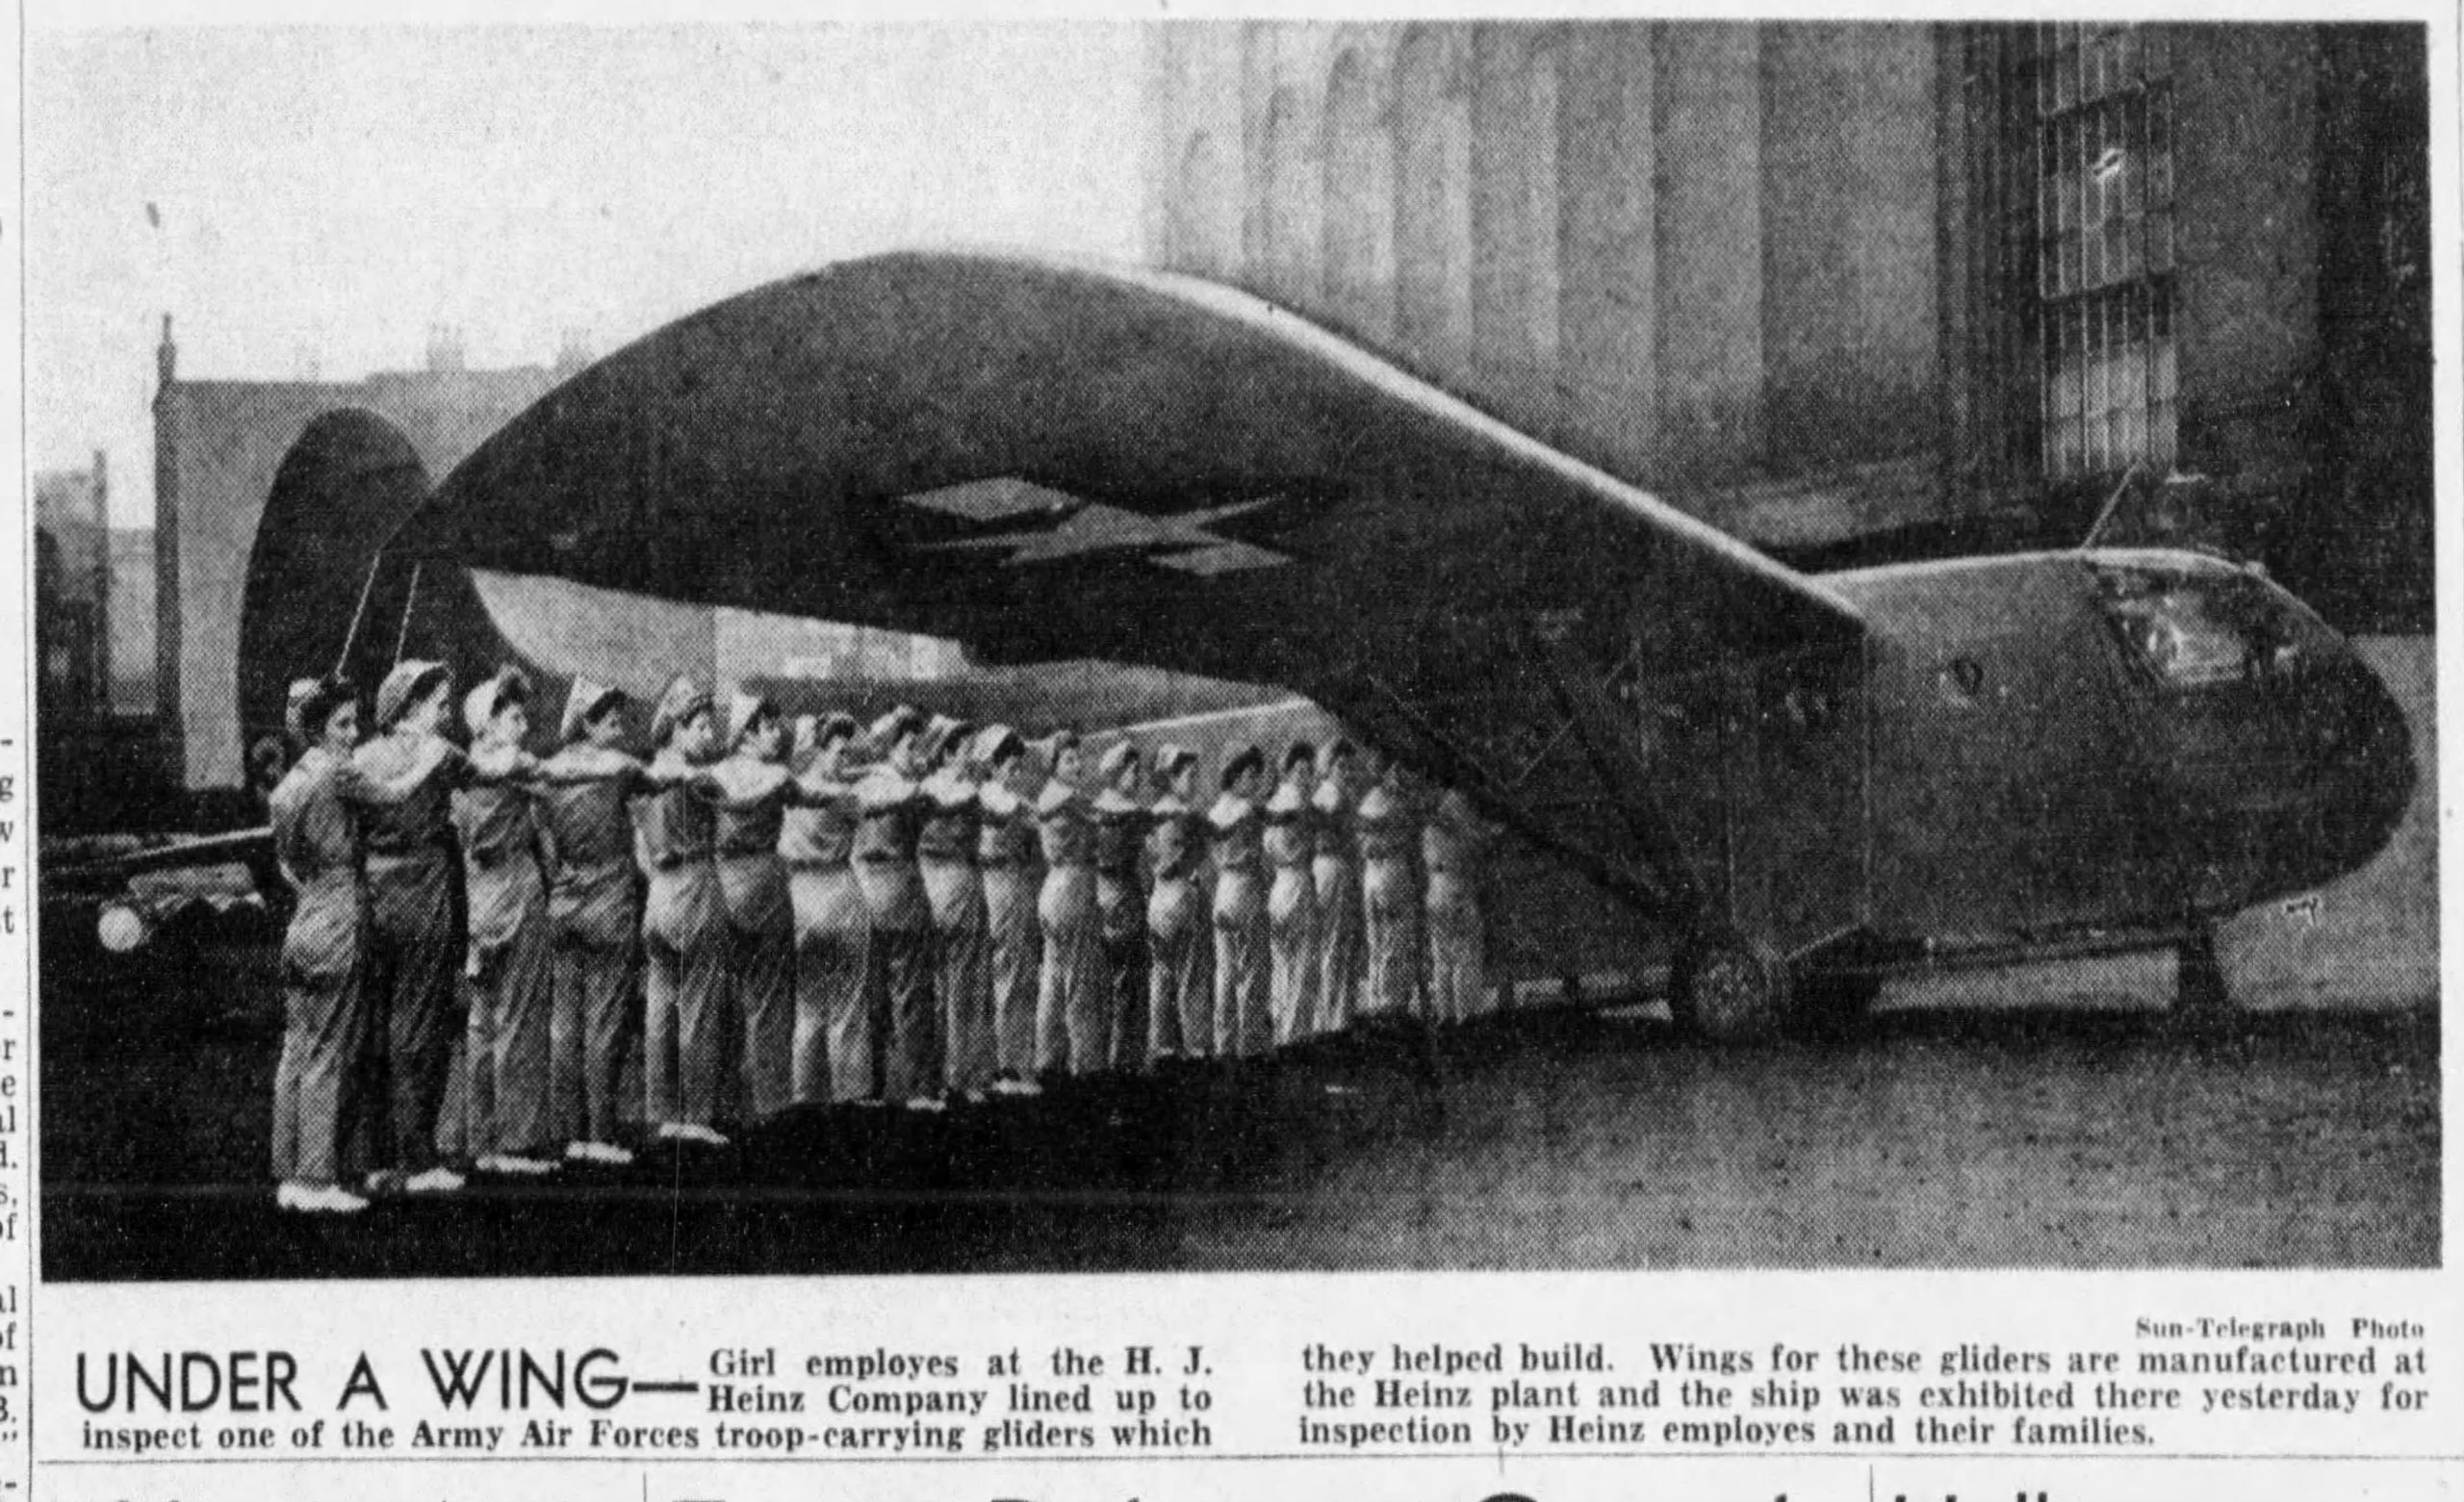 “Under a Wing,” photo feature about a Waco glider finally making an appearance at the H. J. Heinz Company, October 1943.